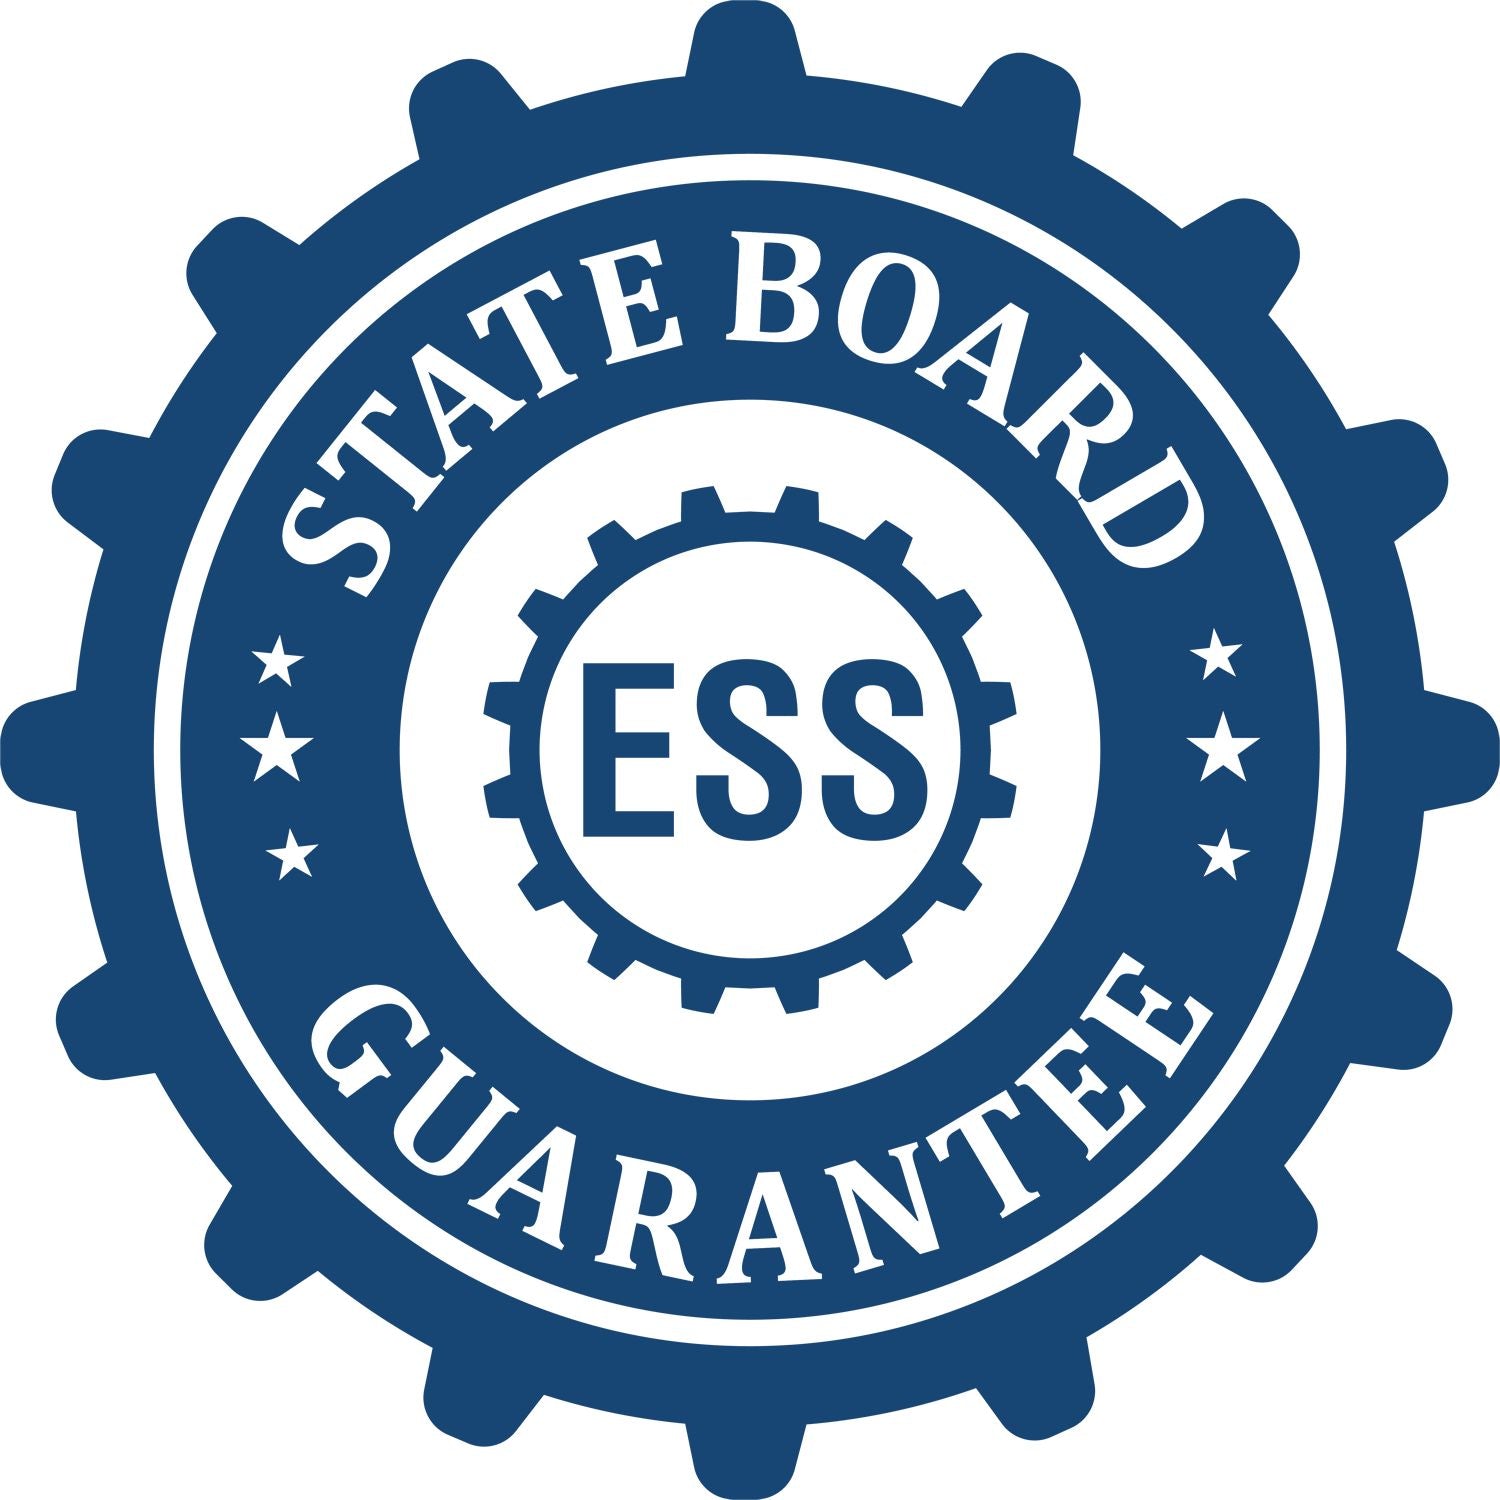 An emblem in a gear shape illustrating a state board guarantee for the Hybrid Oregon Engineer Seal